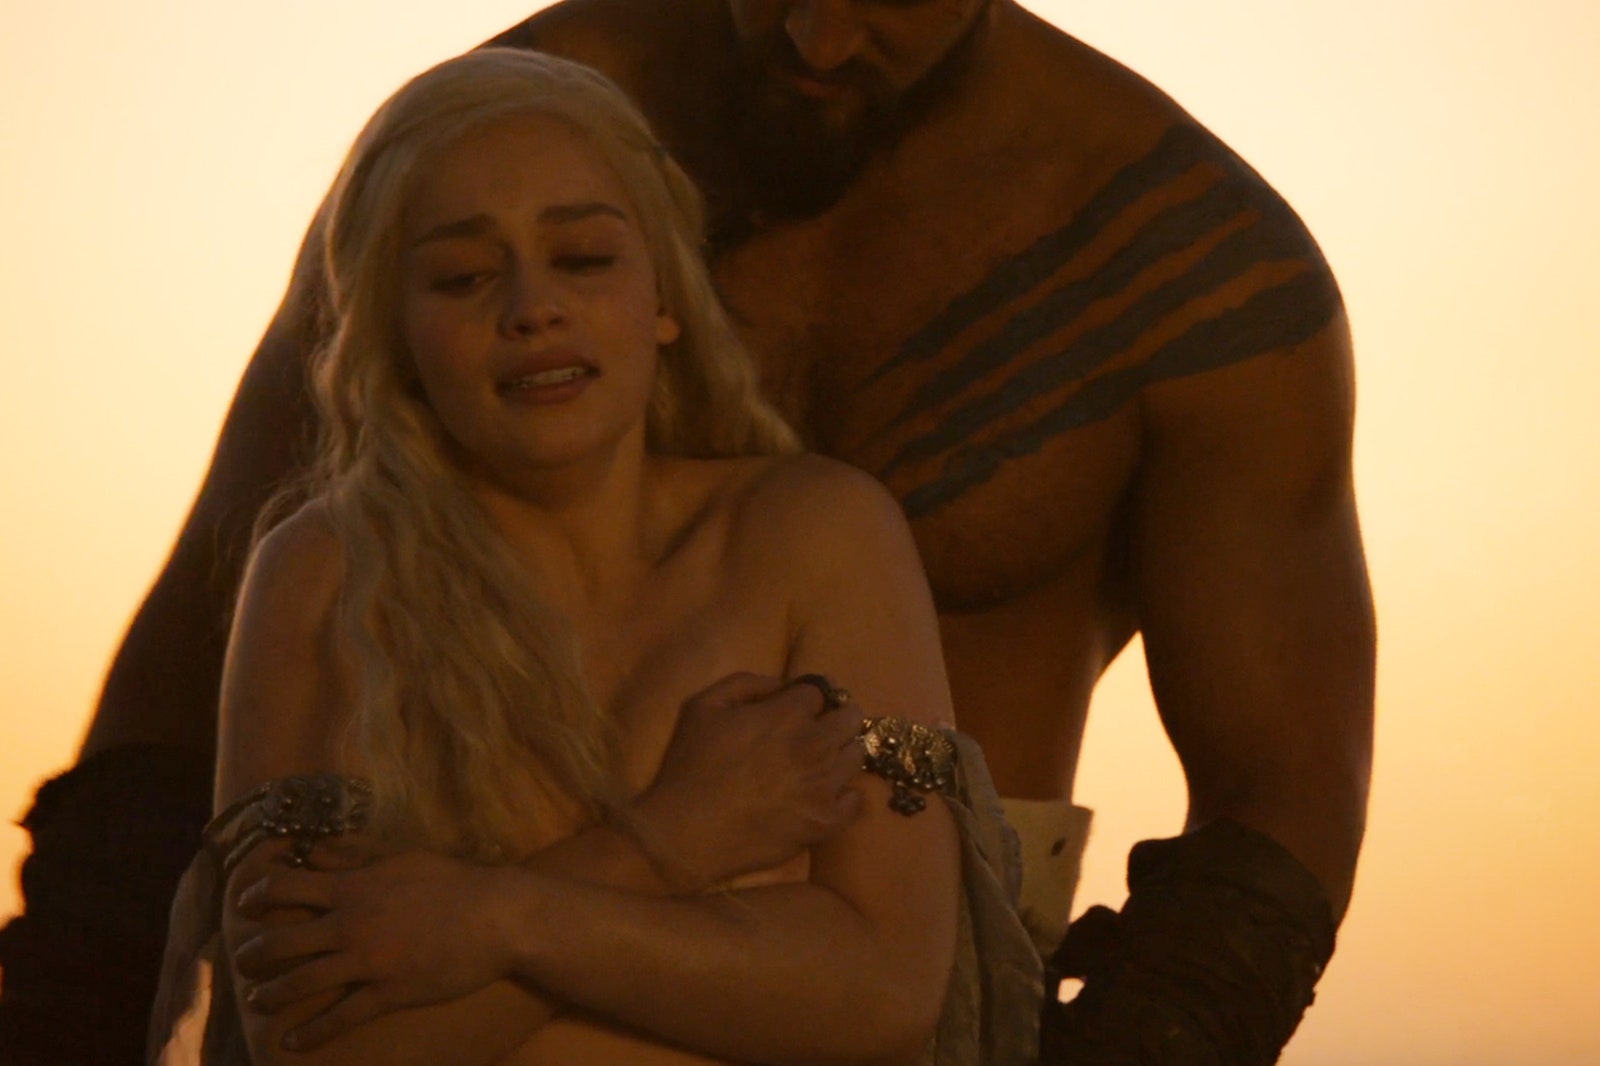 cody marchbanks recommends Dragon Lady Game Of Thrones Naked